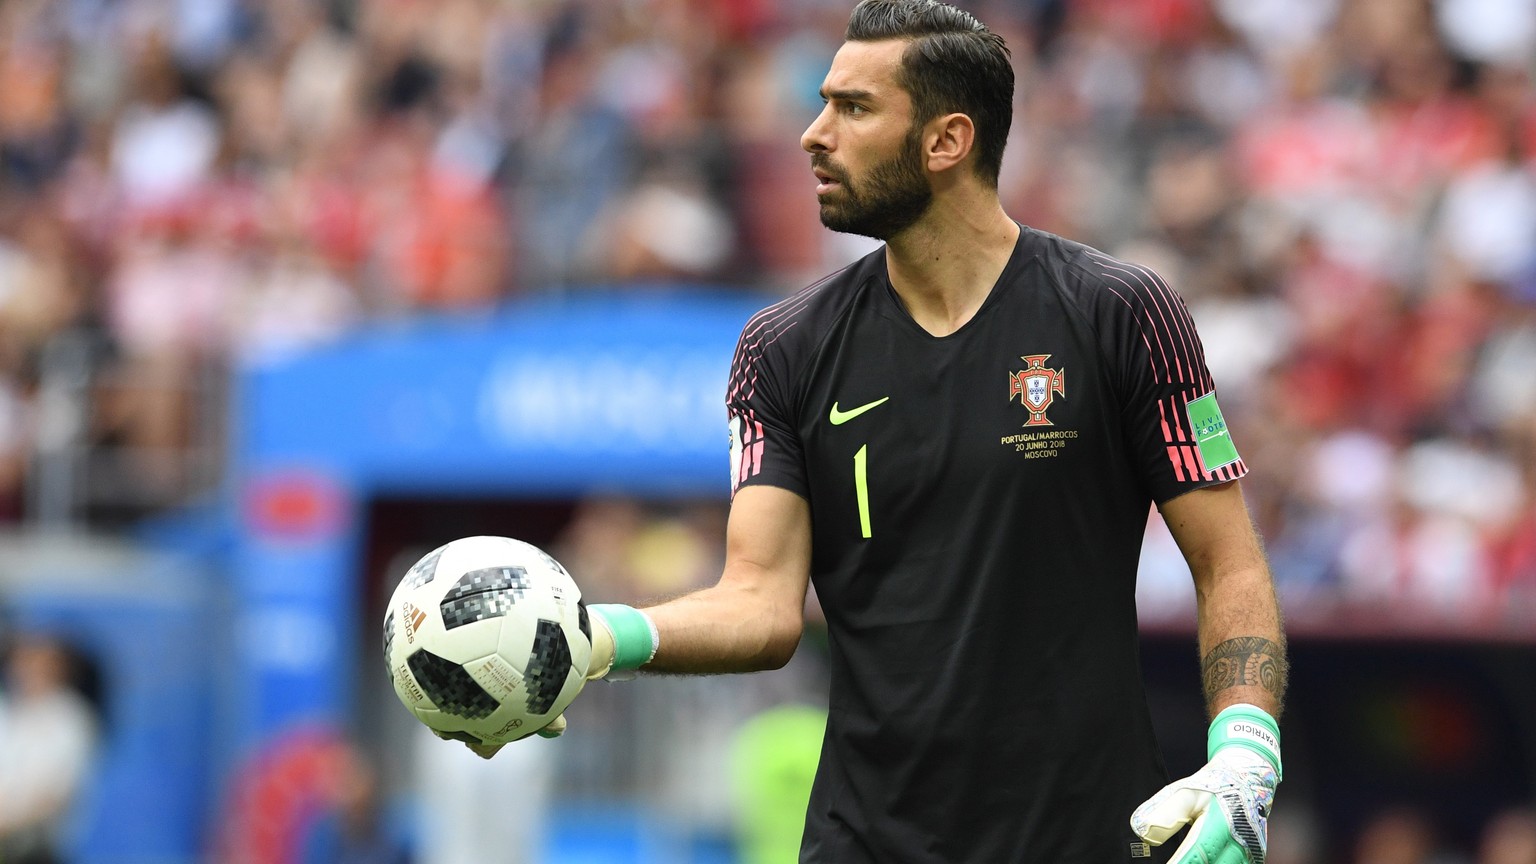 epa06824454 Goalkeeper Rui Patricio of Portugal during the FIFA World Cup 2018 group B preliminary round soccer match between Portugal and Morocco in Moscow, Russia, 20 June 2018.

(RESTRICTIONS APP ...